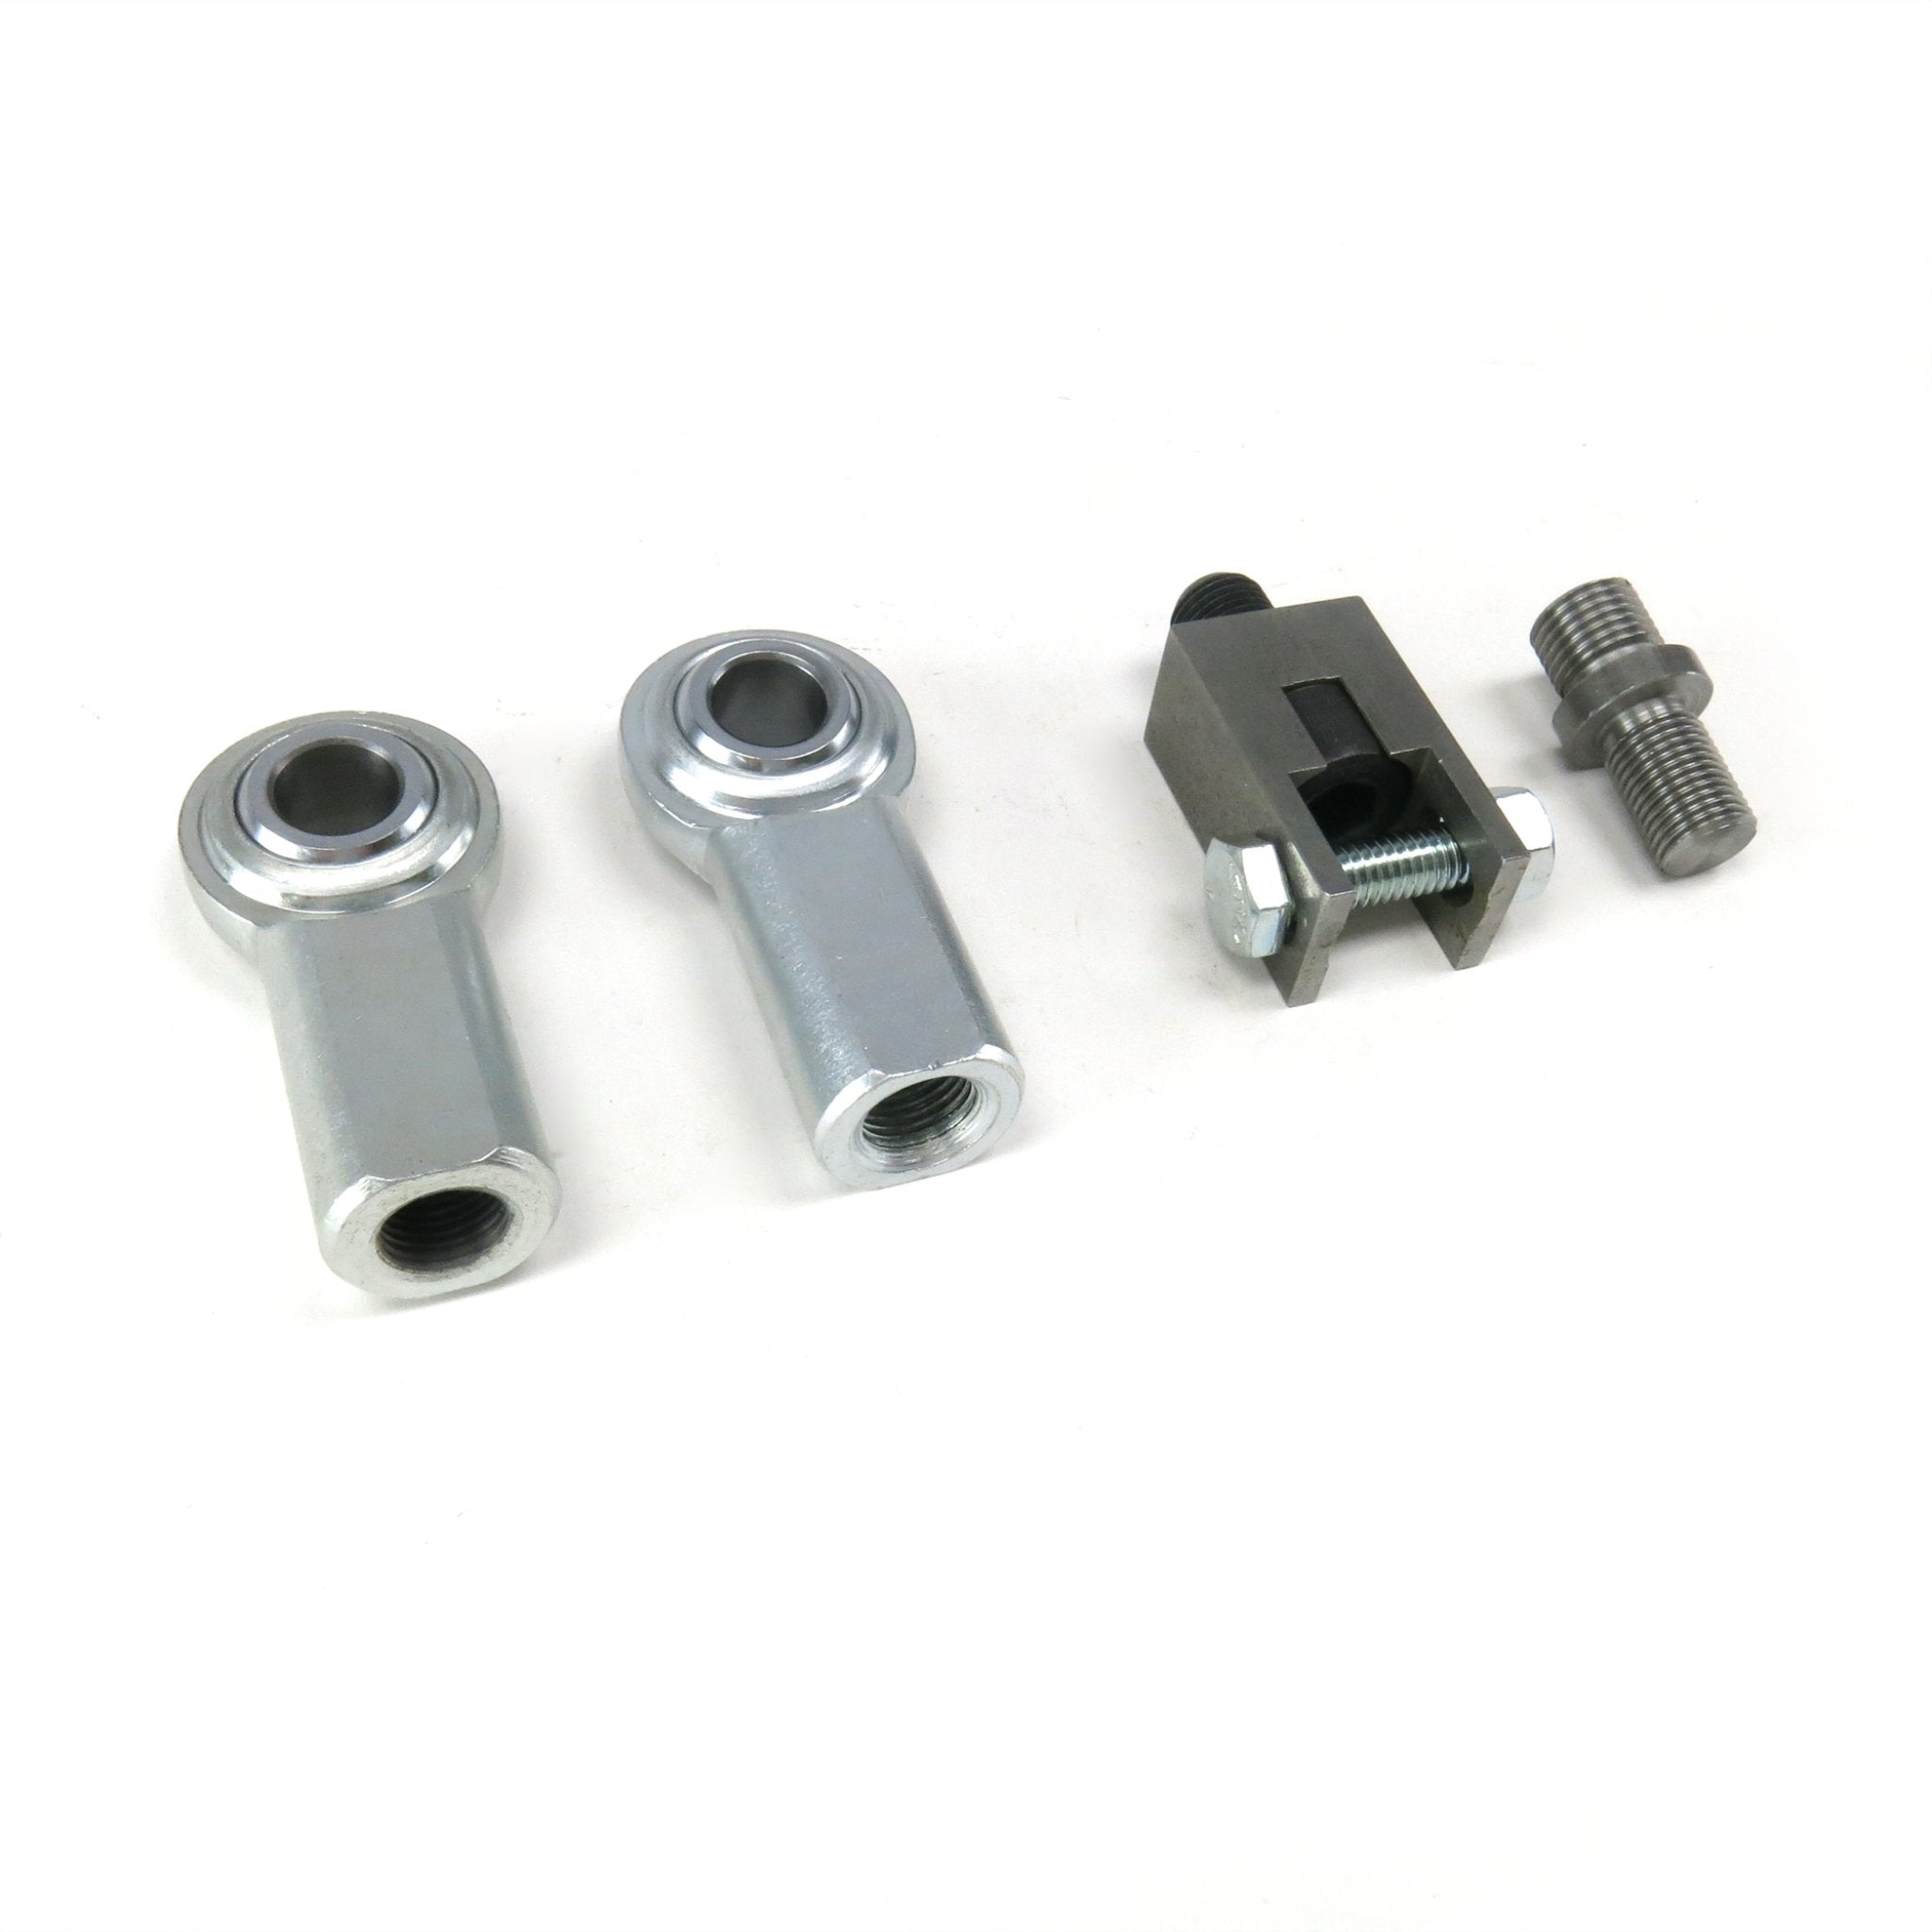 Linear Actuator Rod Bearing Kit Upgrade Threaded Ends Multiple Angle Install